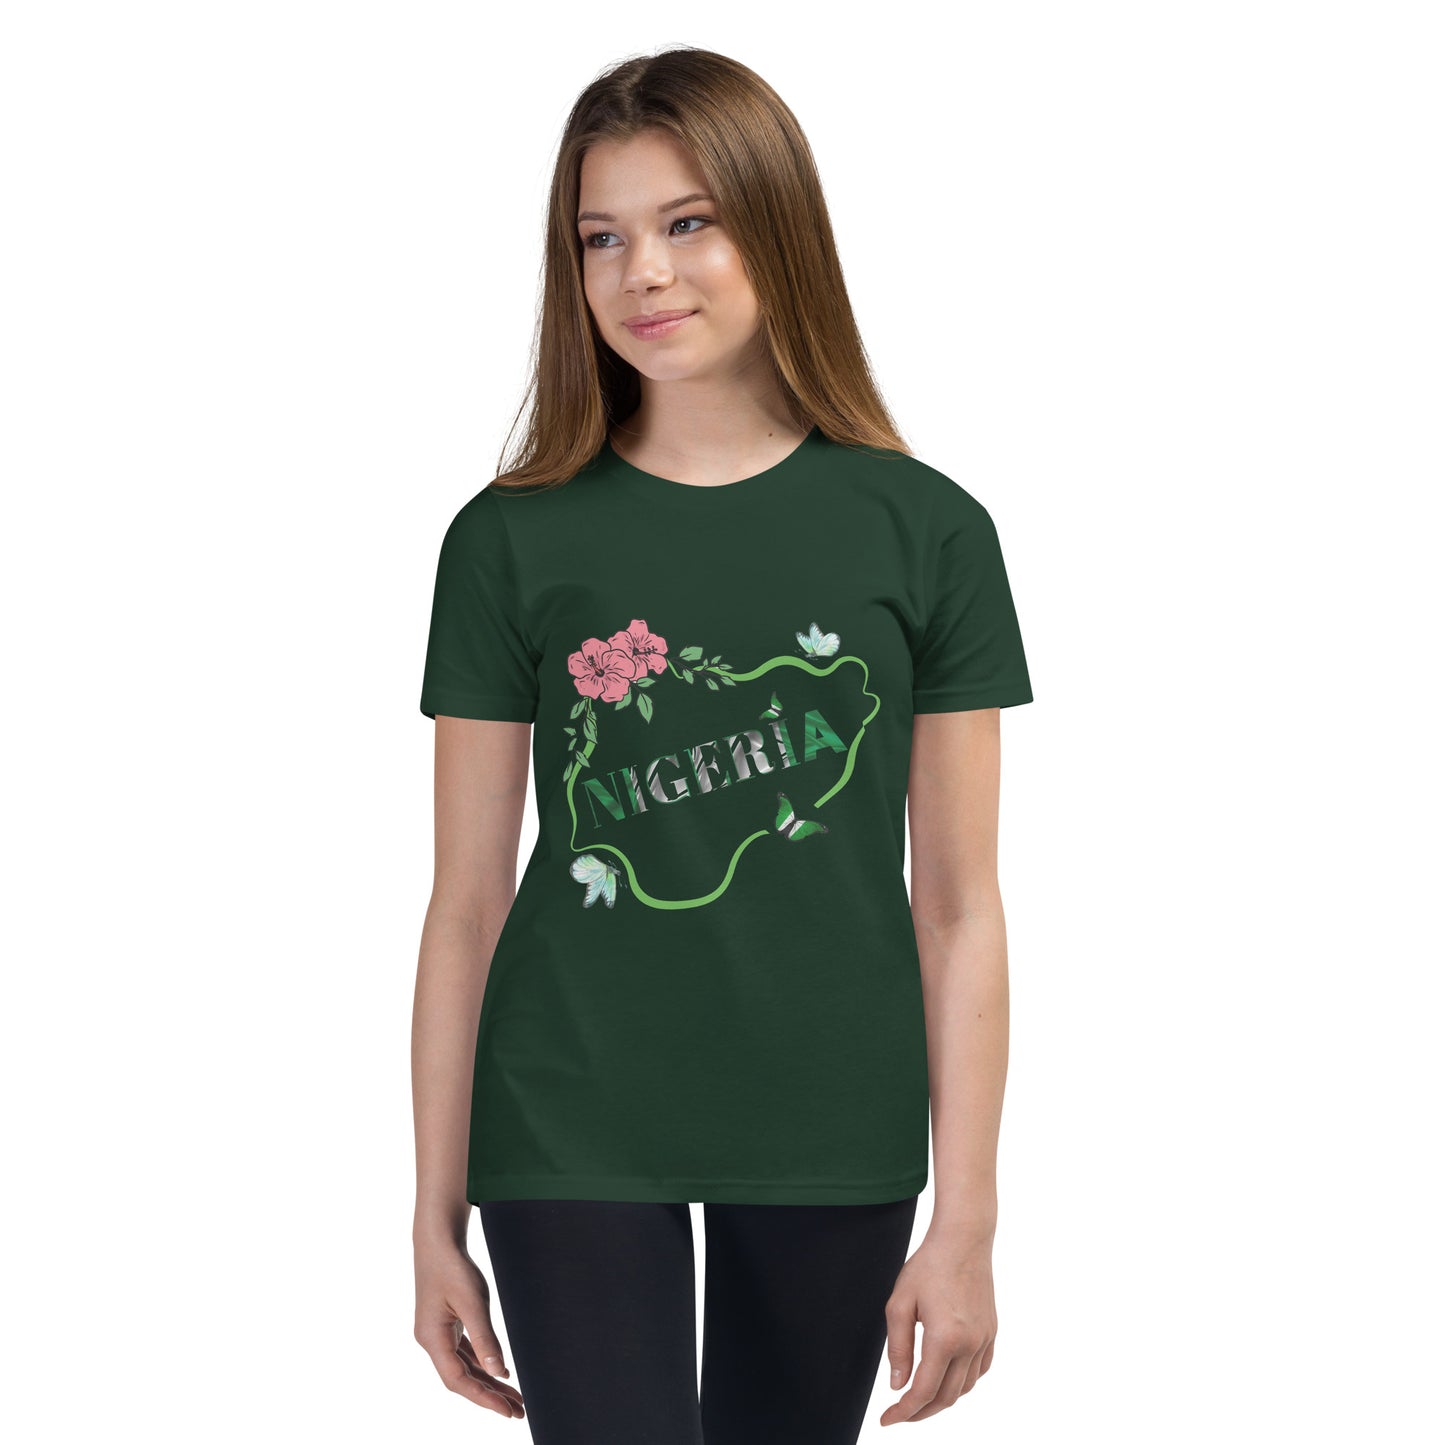 Nigeria Butterfly Youth Short Sleeve T-Shirt